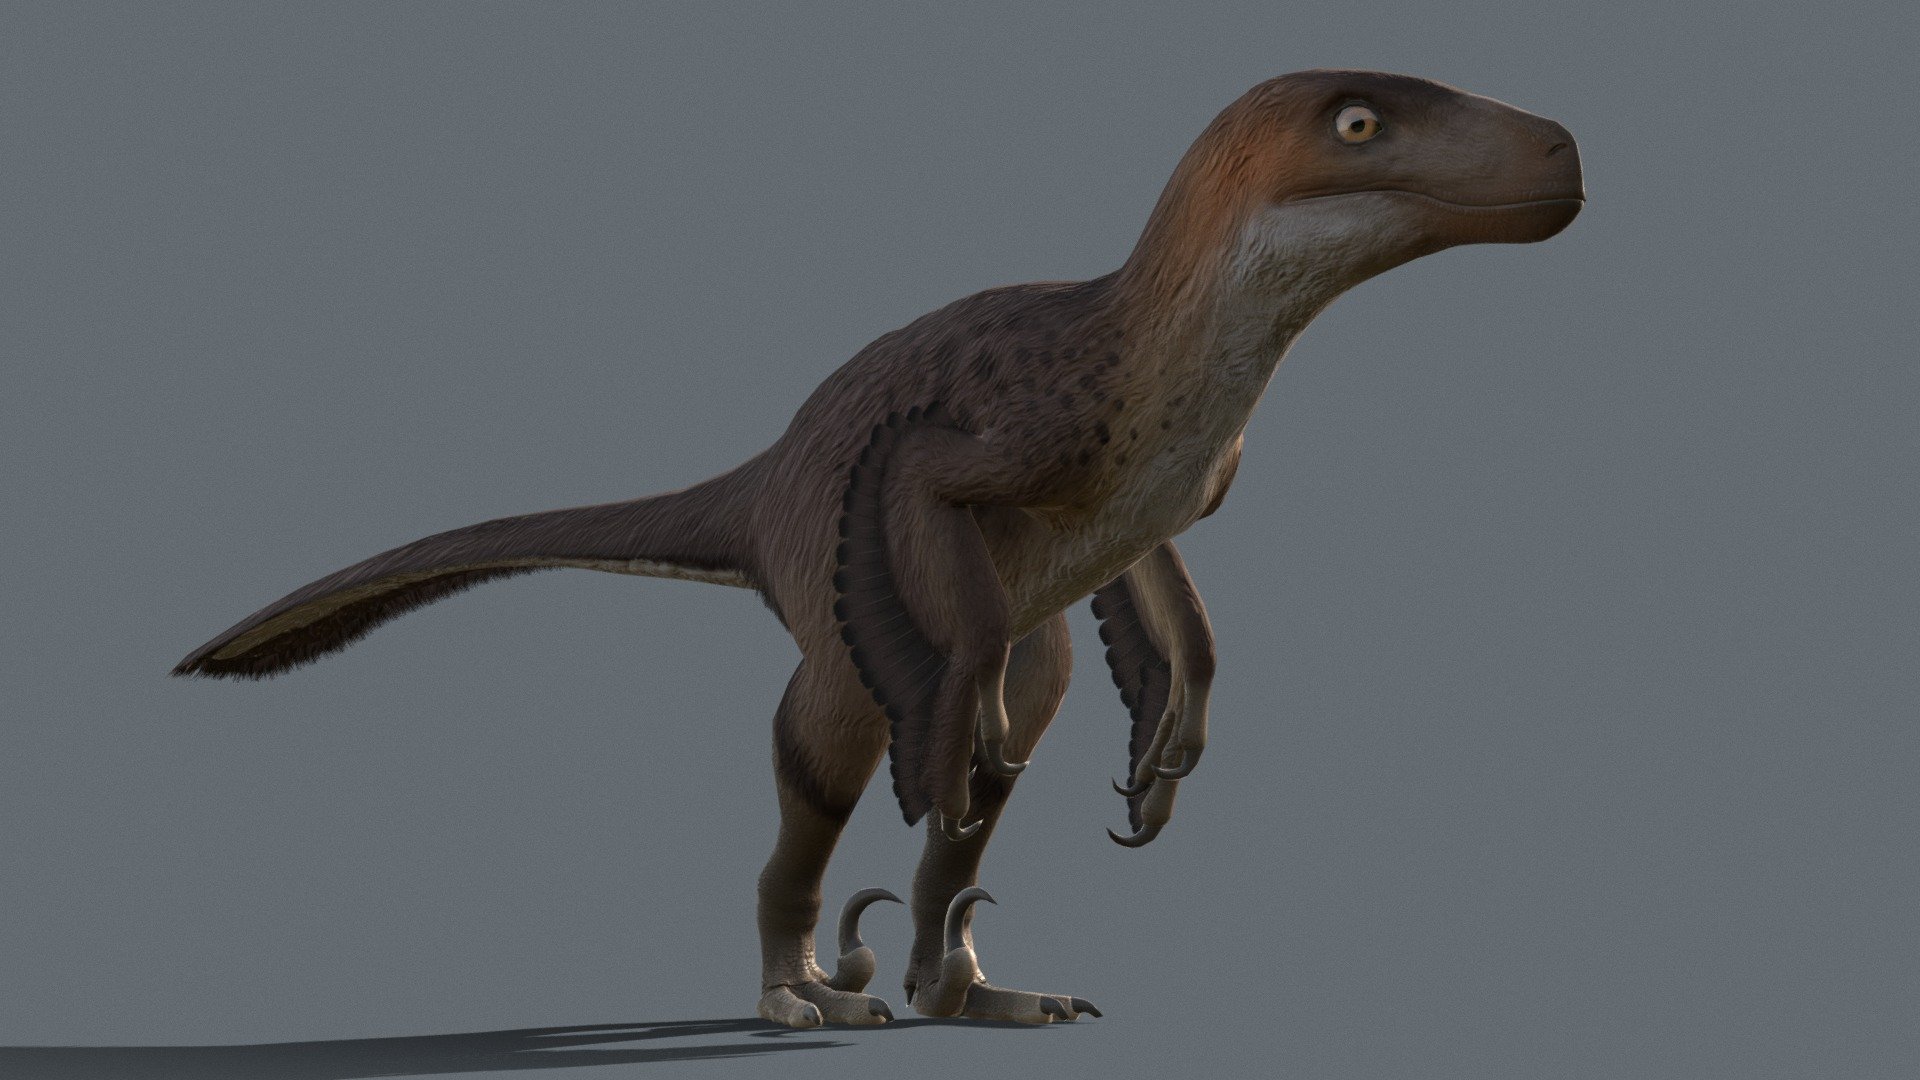 Animations included:



Idle

Stretch emote

Bite

Pounce

Eat

Sit

Sit &amp; Look around emote

Stand

Walk

Run

update: added Bite, Pounce &amp; Eating animation - Utahraptor - low poly animated model - Buy Royalty Free 3D model by Wobbly Works (@WobblyG) 3d model